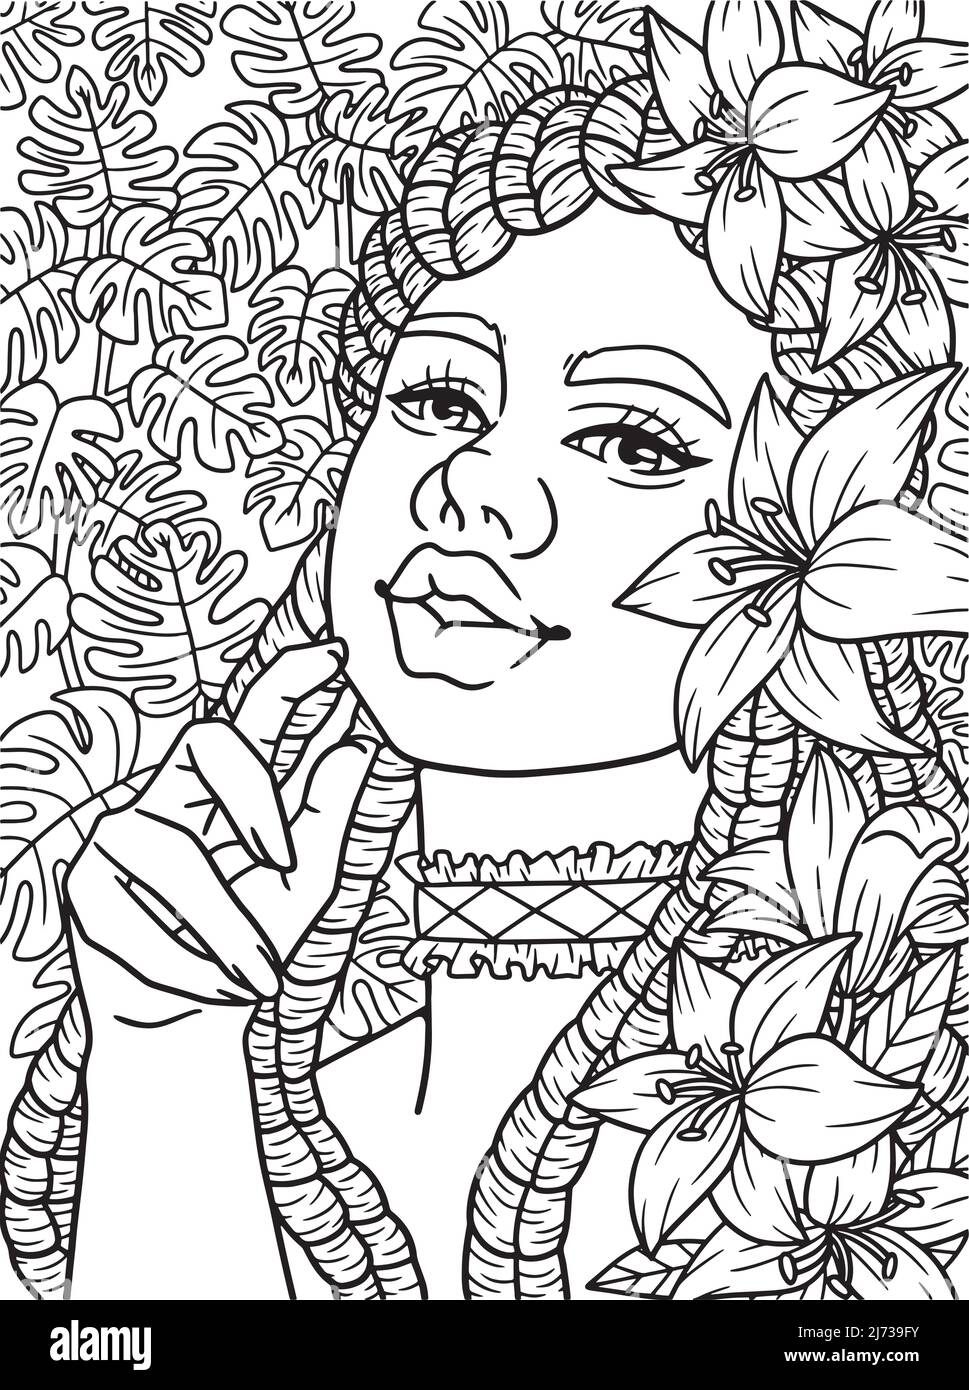 Afro American Flower Girl Adult Coloring Stock Vector